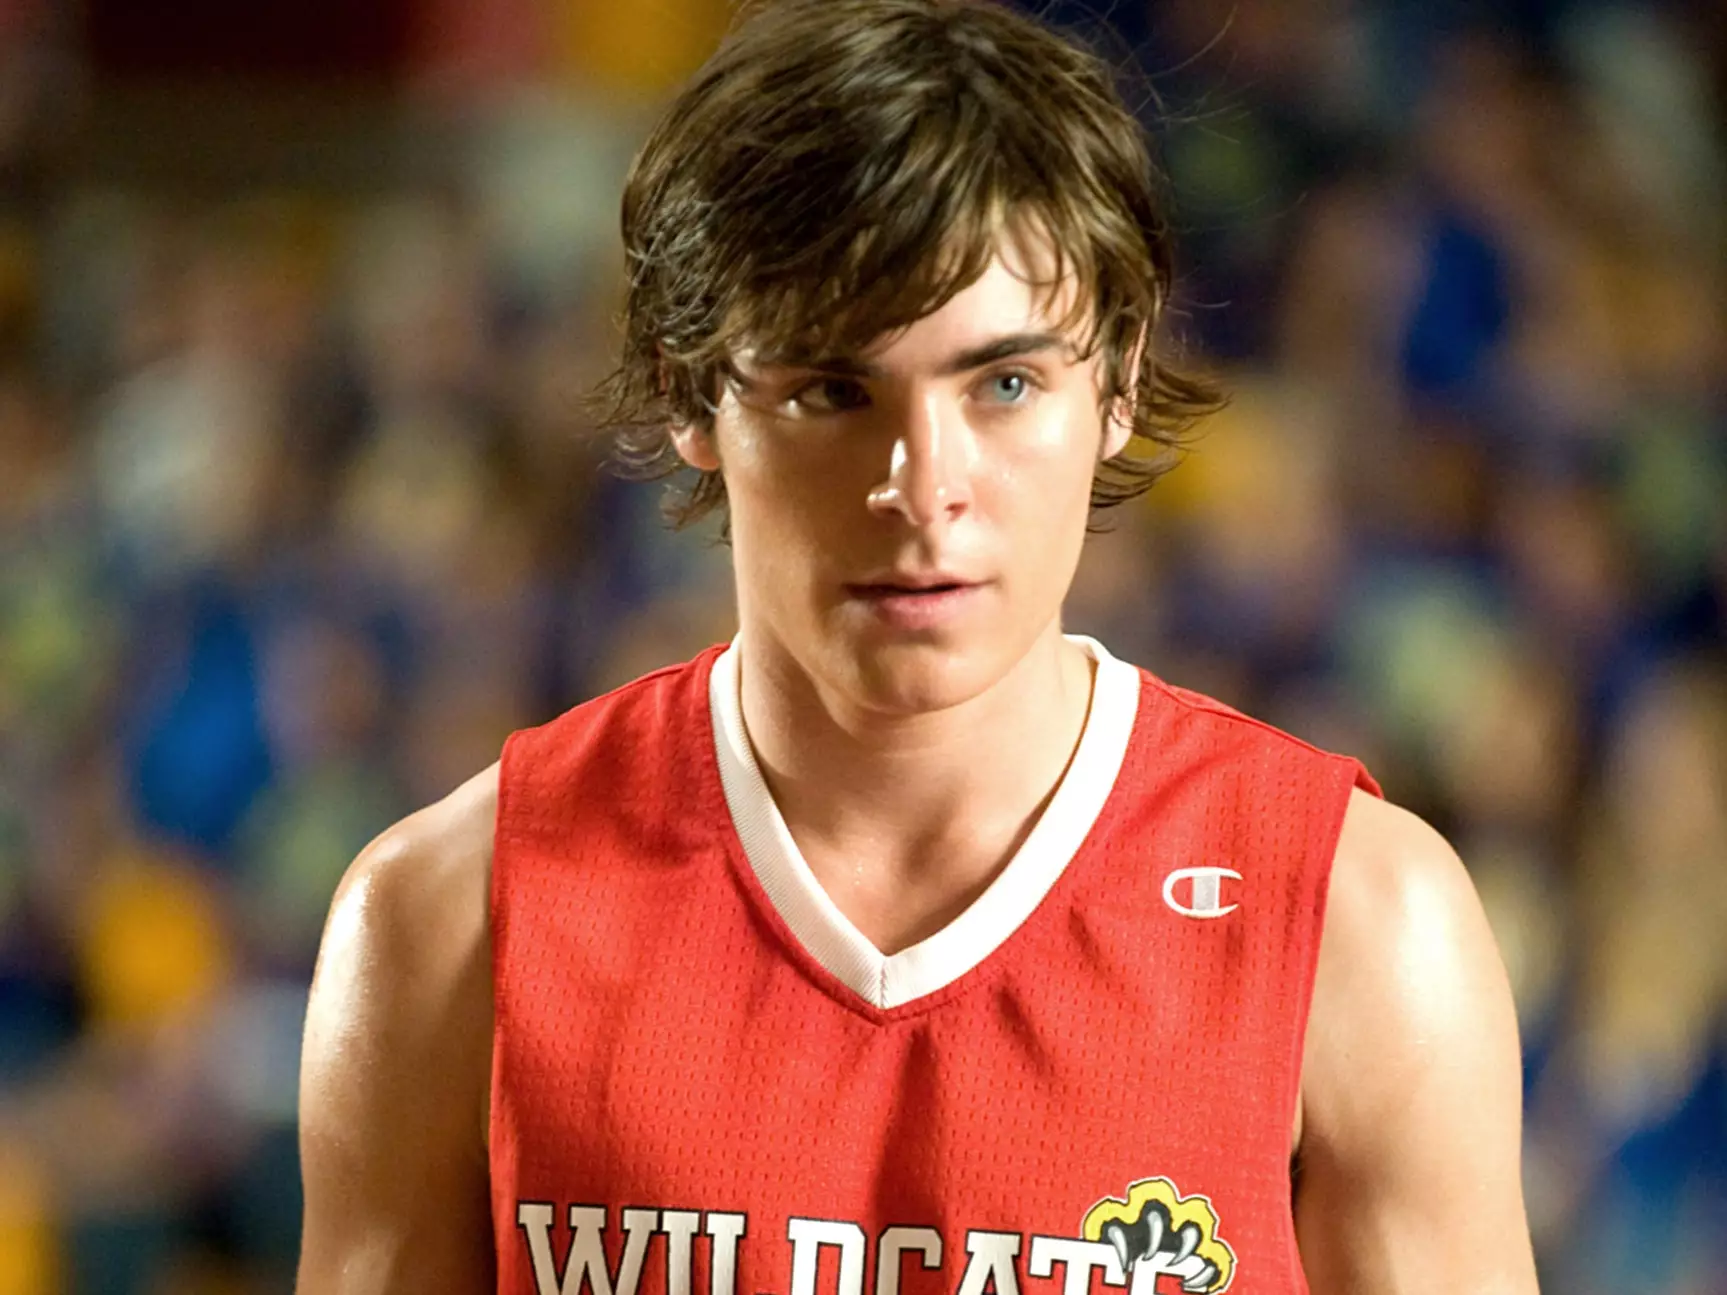 Zac Efron rose to fame after starring as Troy Bolton in High School Musical at just 18 years old (